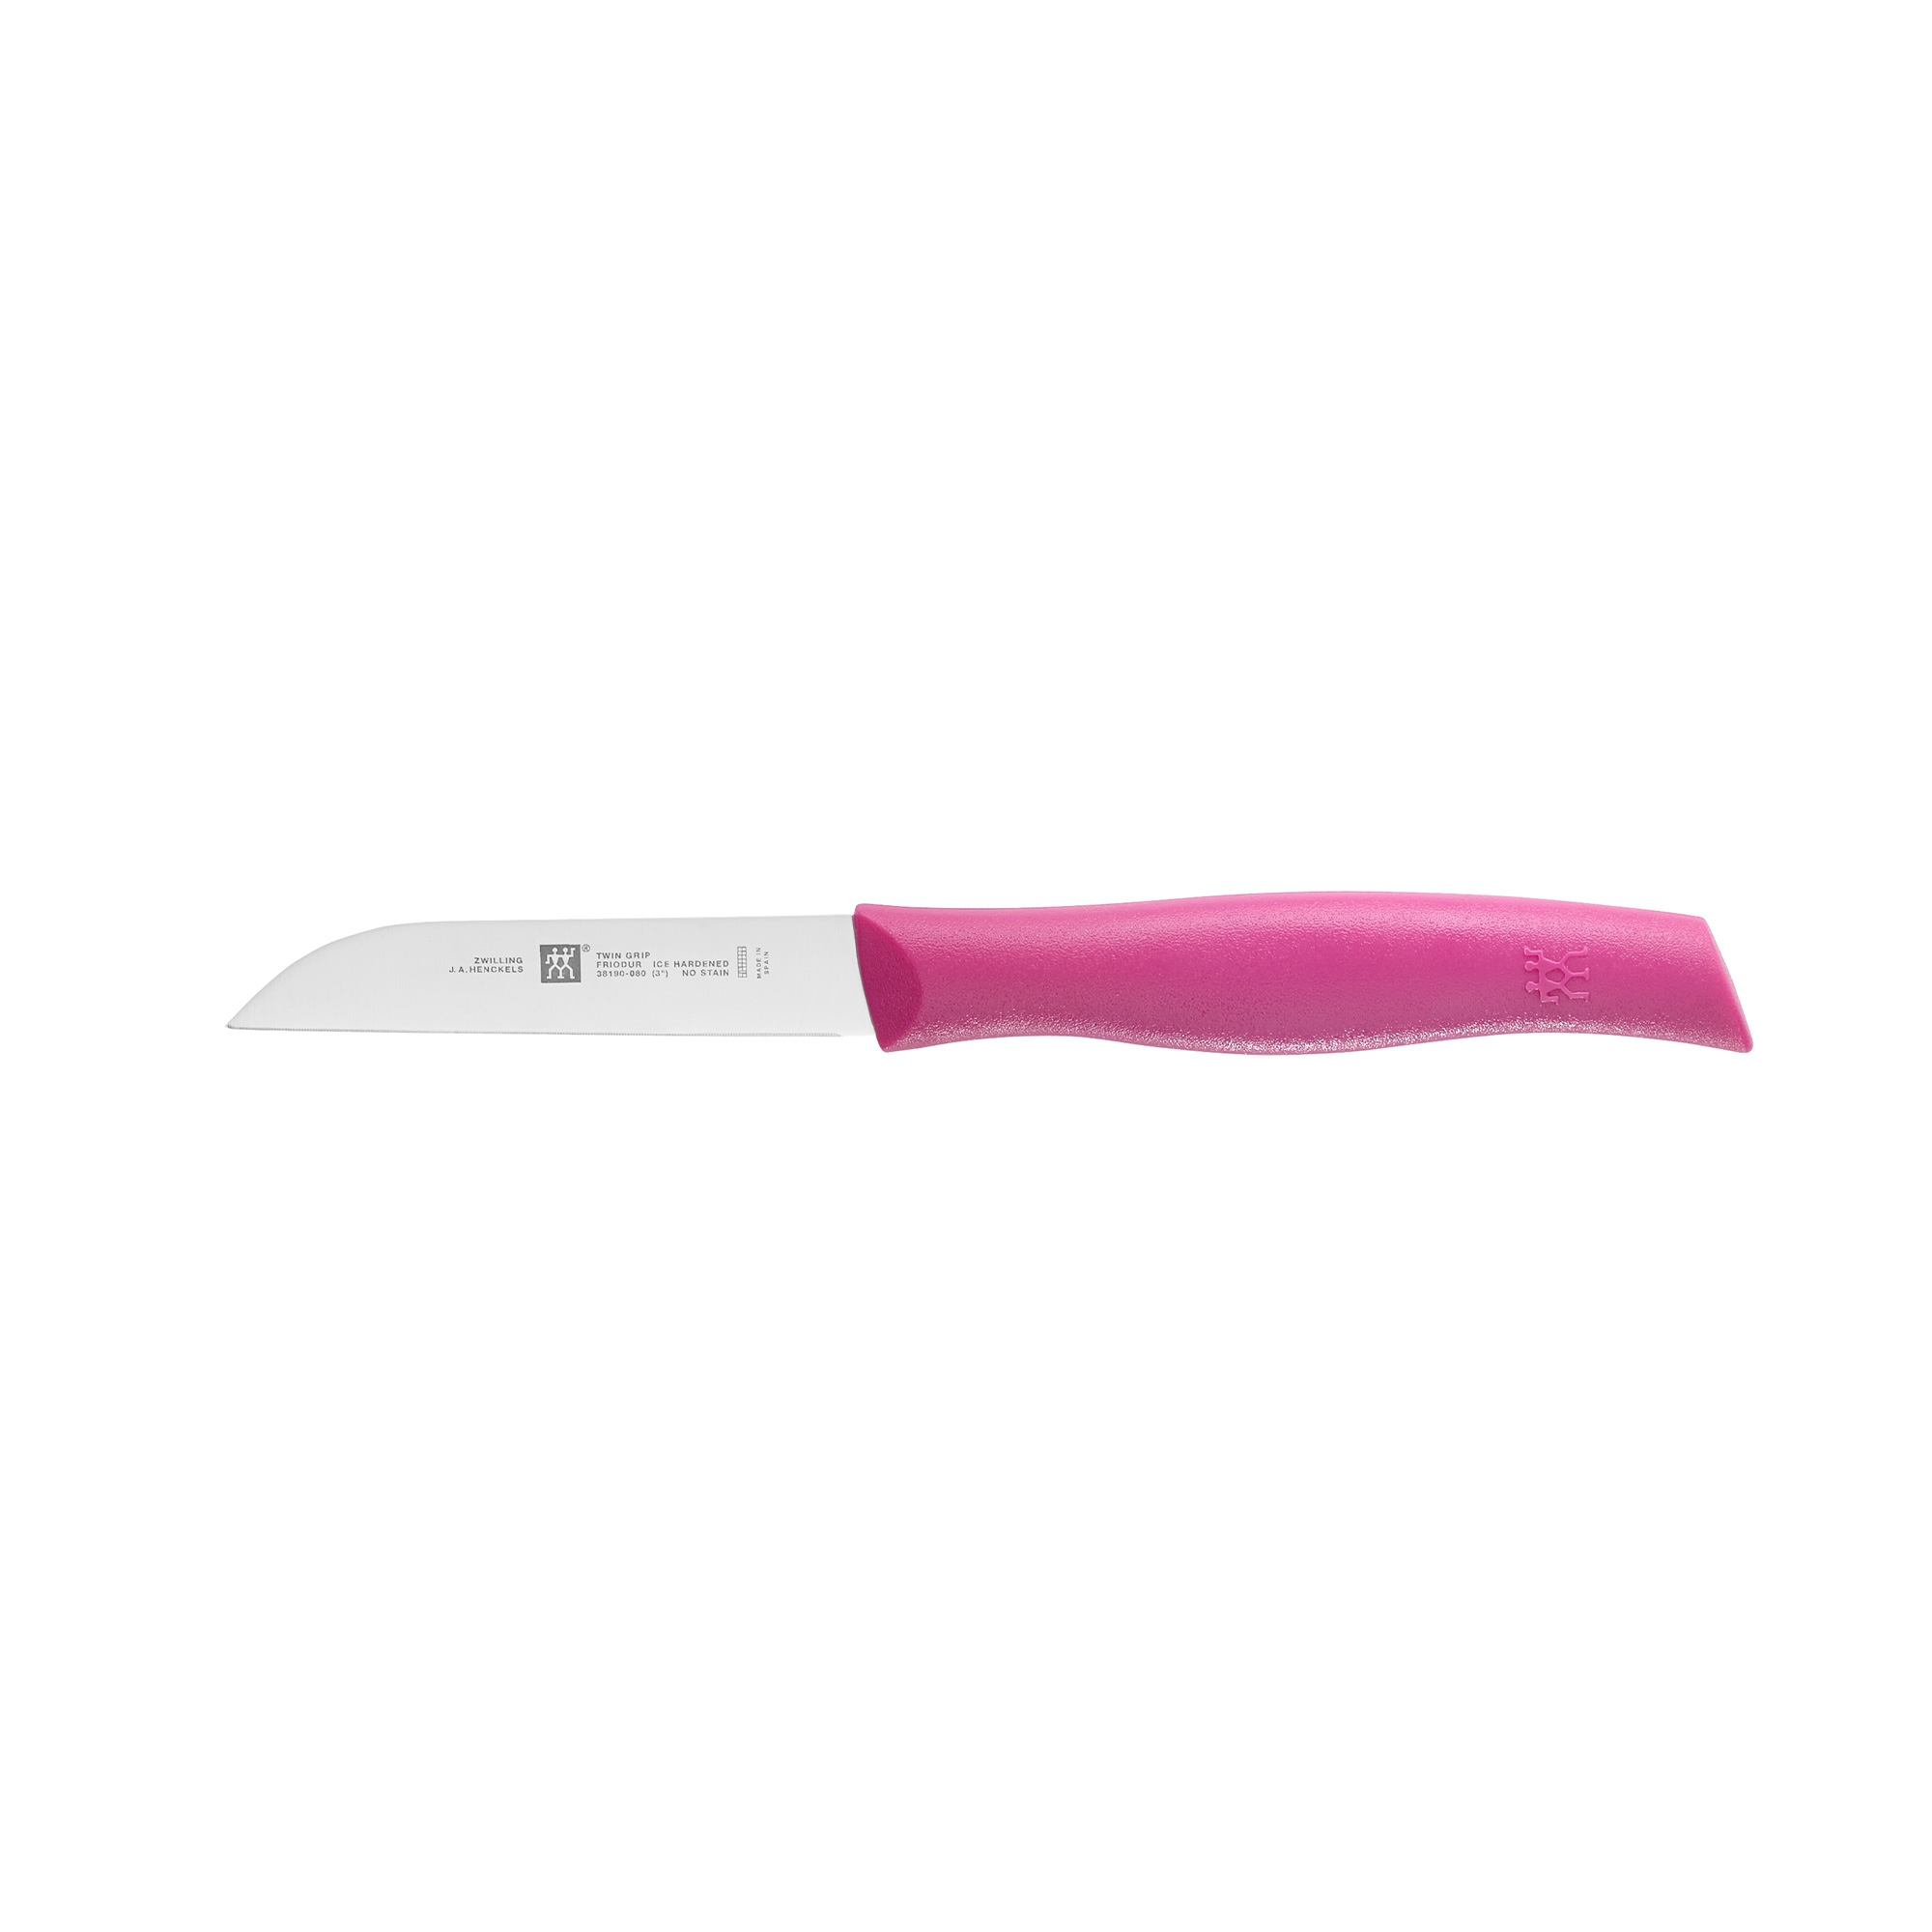 Zwilling - knife set of 2, pink/turquoise